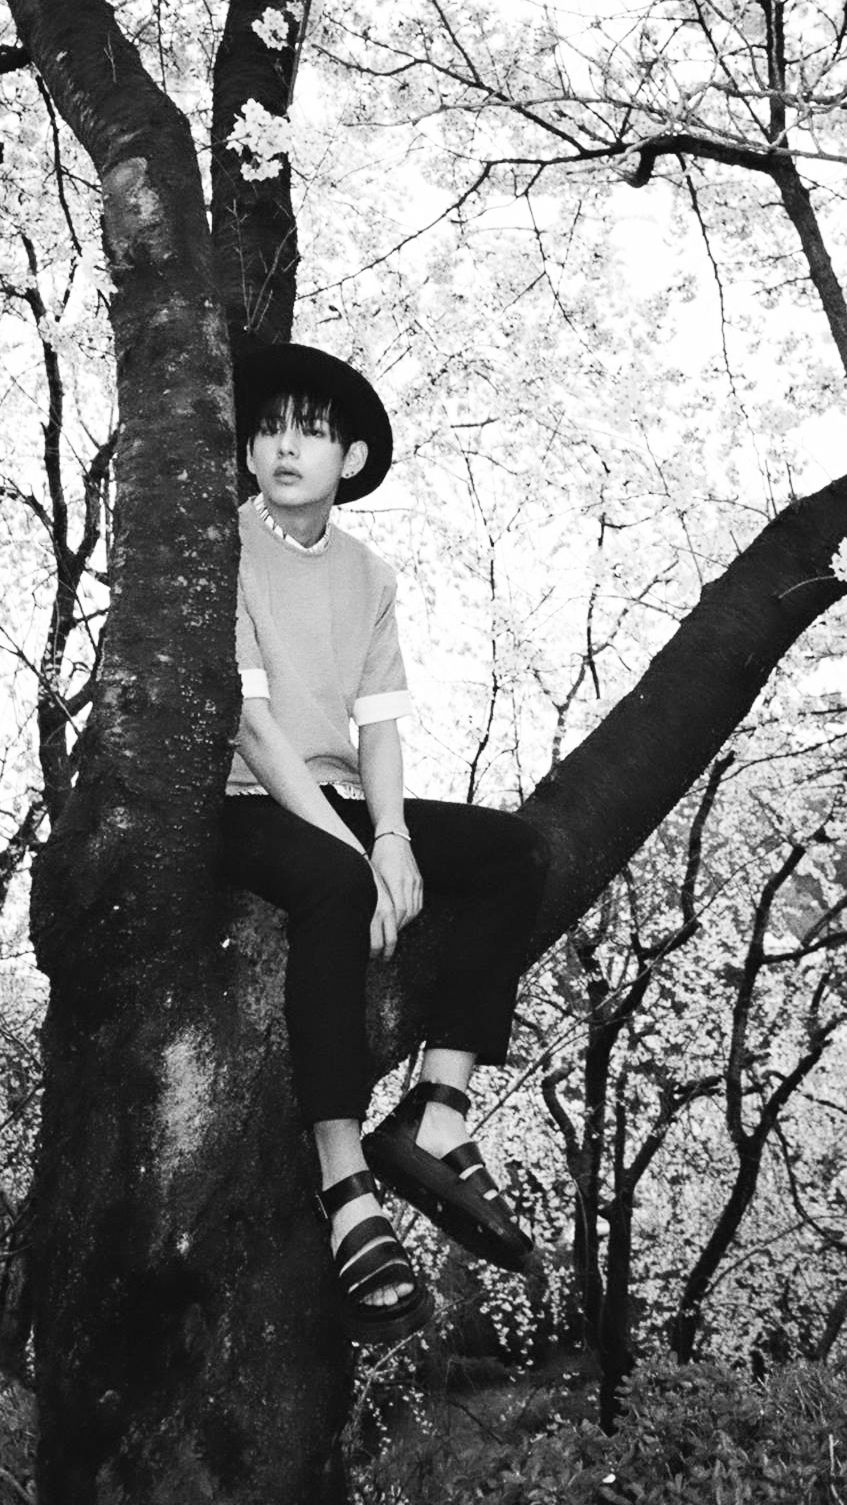 beyaz wallpaper,people in nature,photograph,tree,branch,black and white